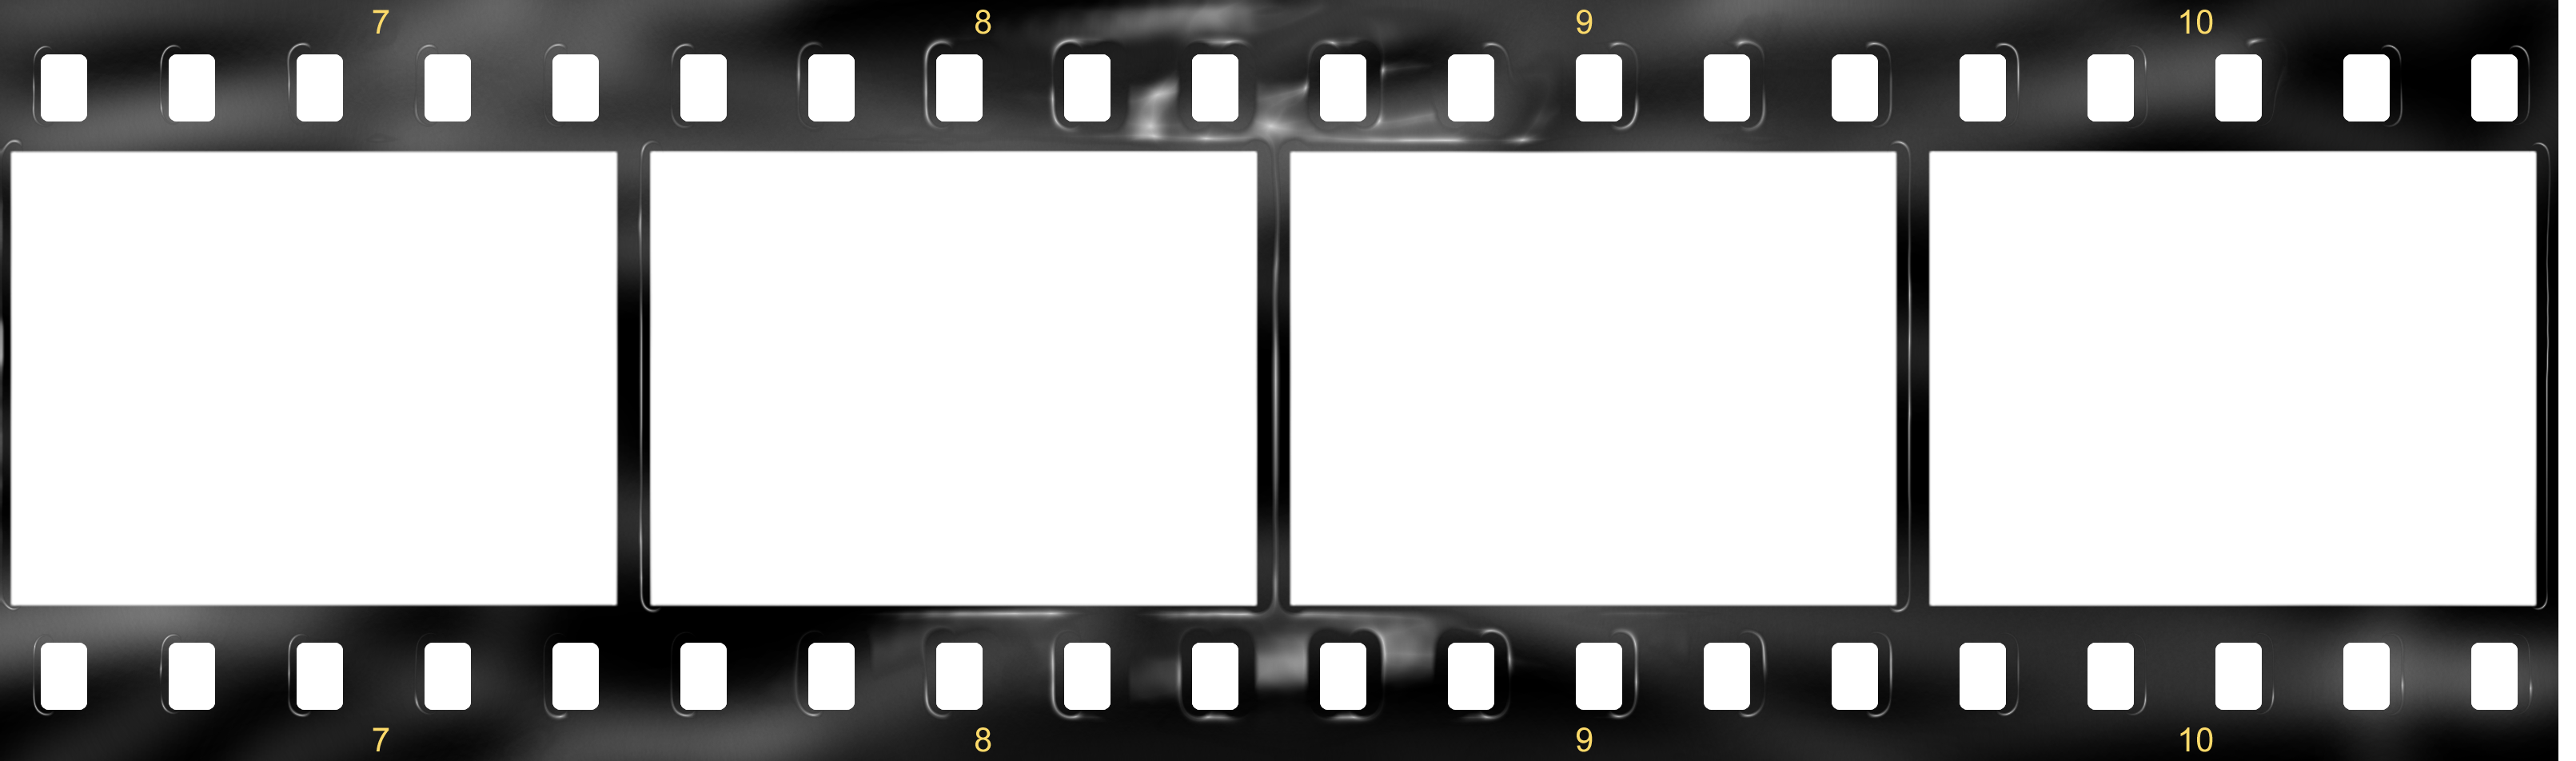 Filmstrip template #33807 - Free Icons and PNG Backgrounds